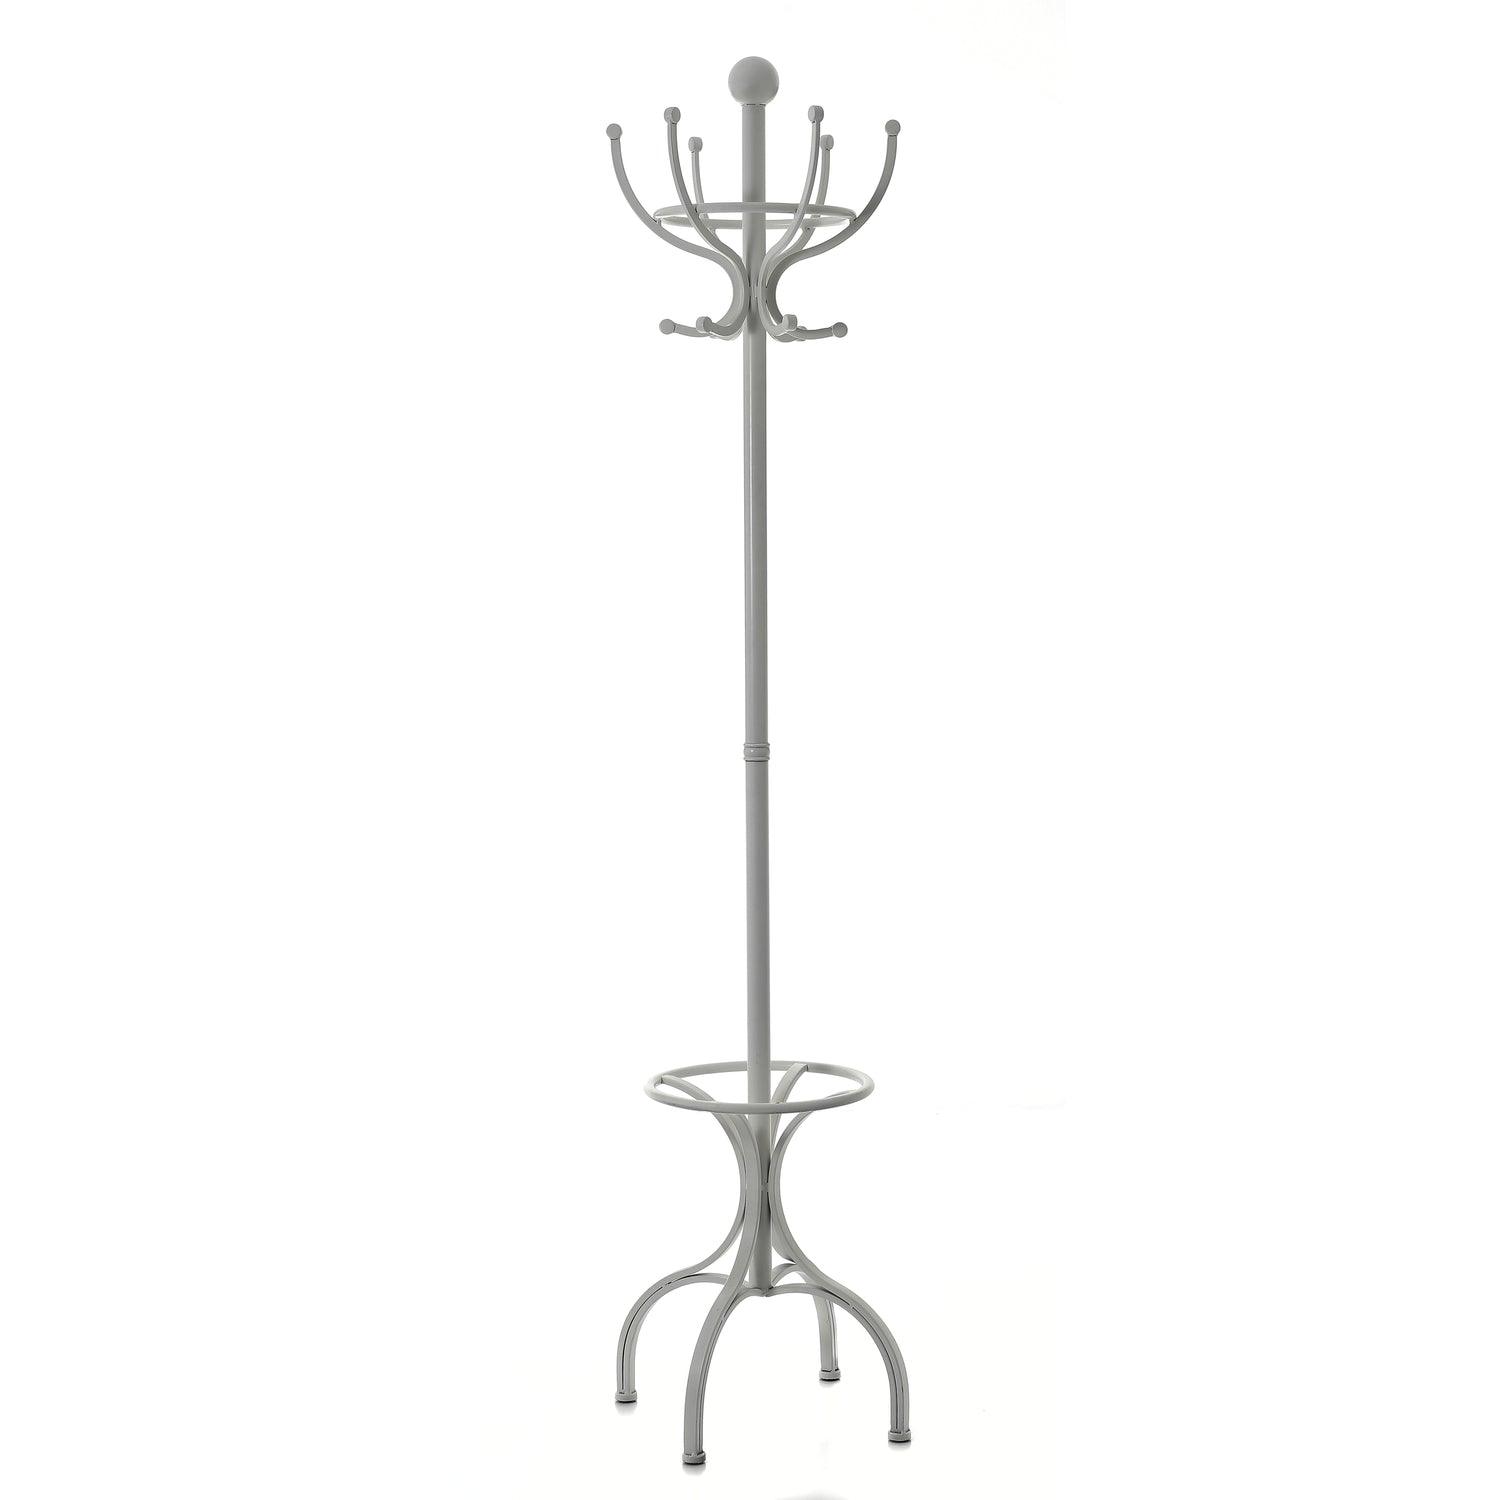 View White Hat Coat Stand information